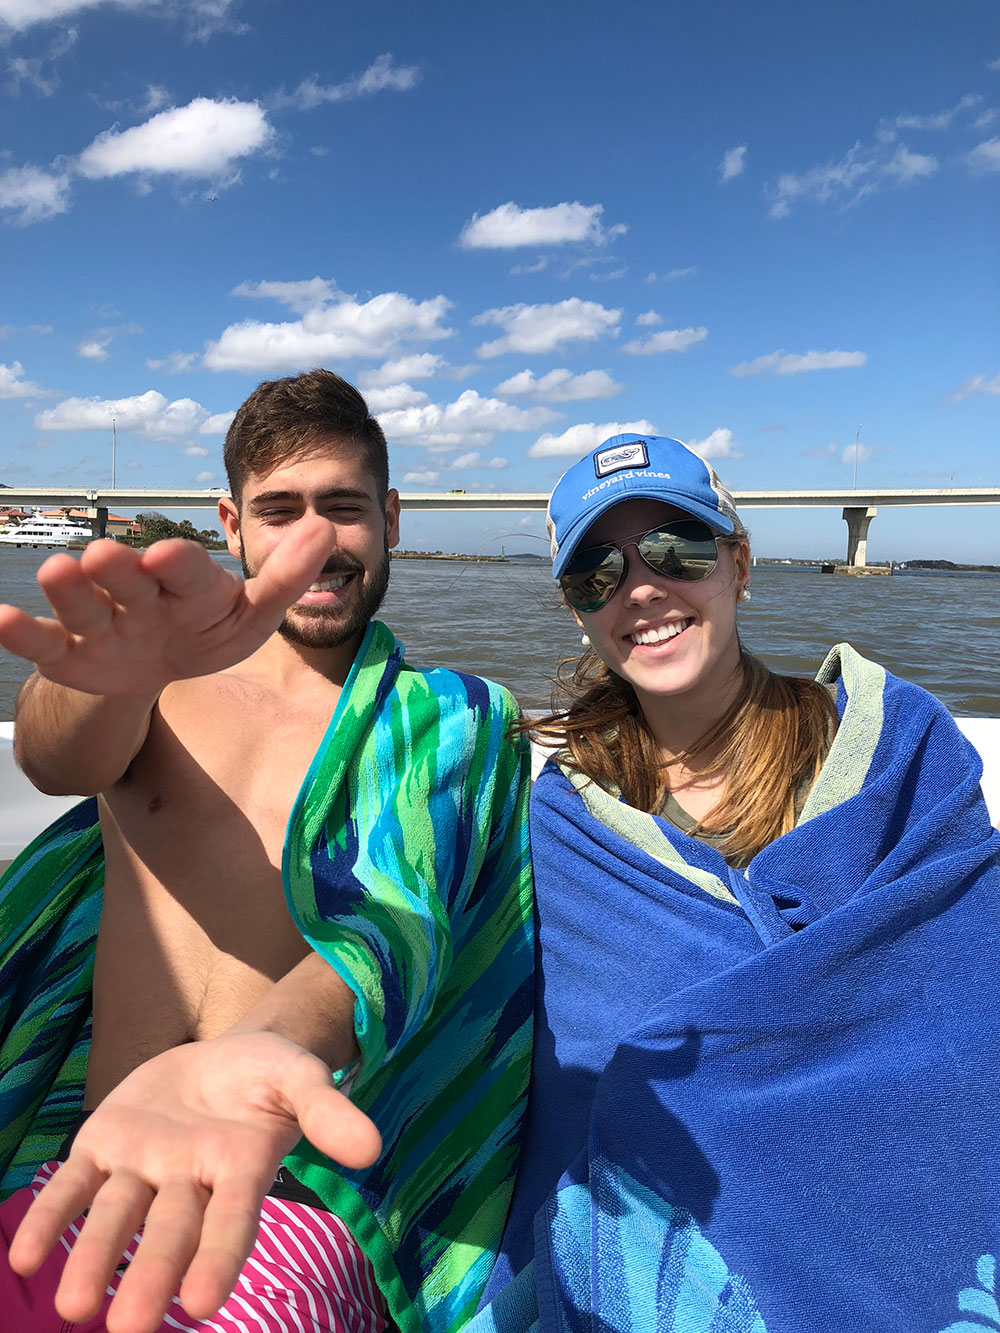 Teenage boy making alligator hand gesture sitting next to girl wrapped in a towel